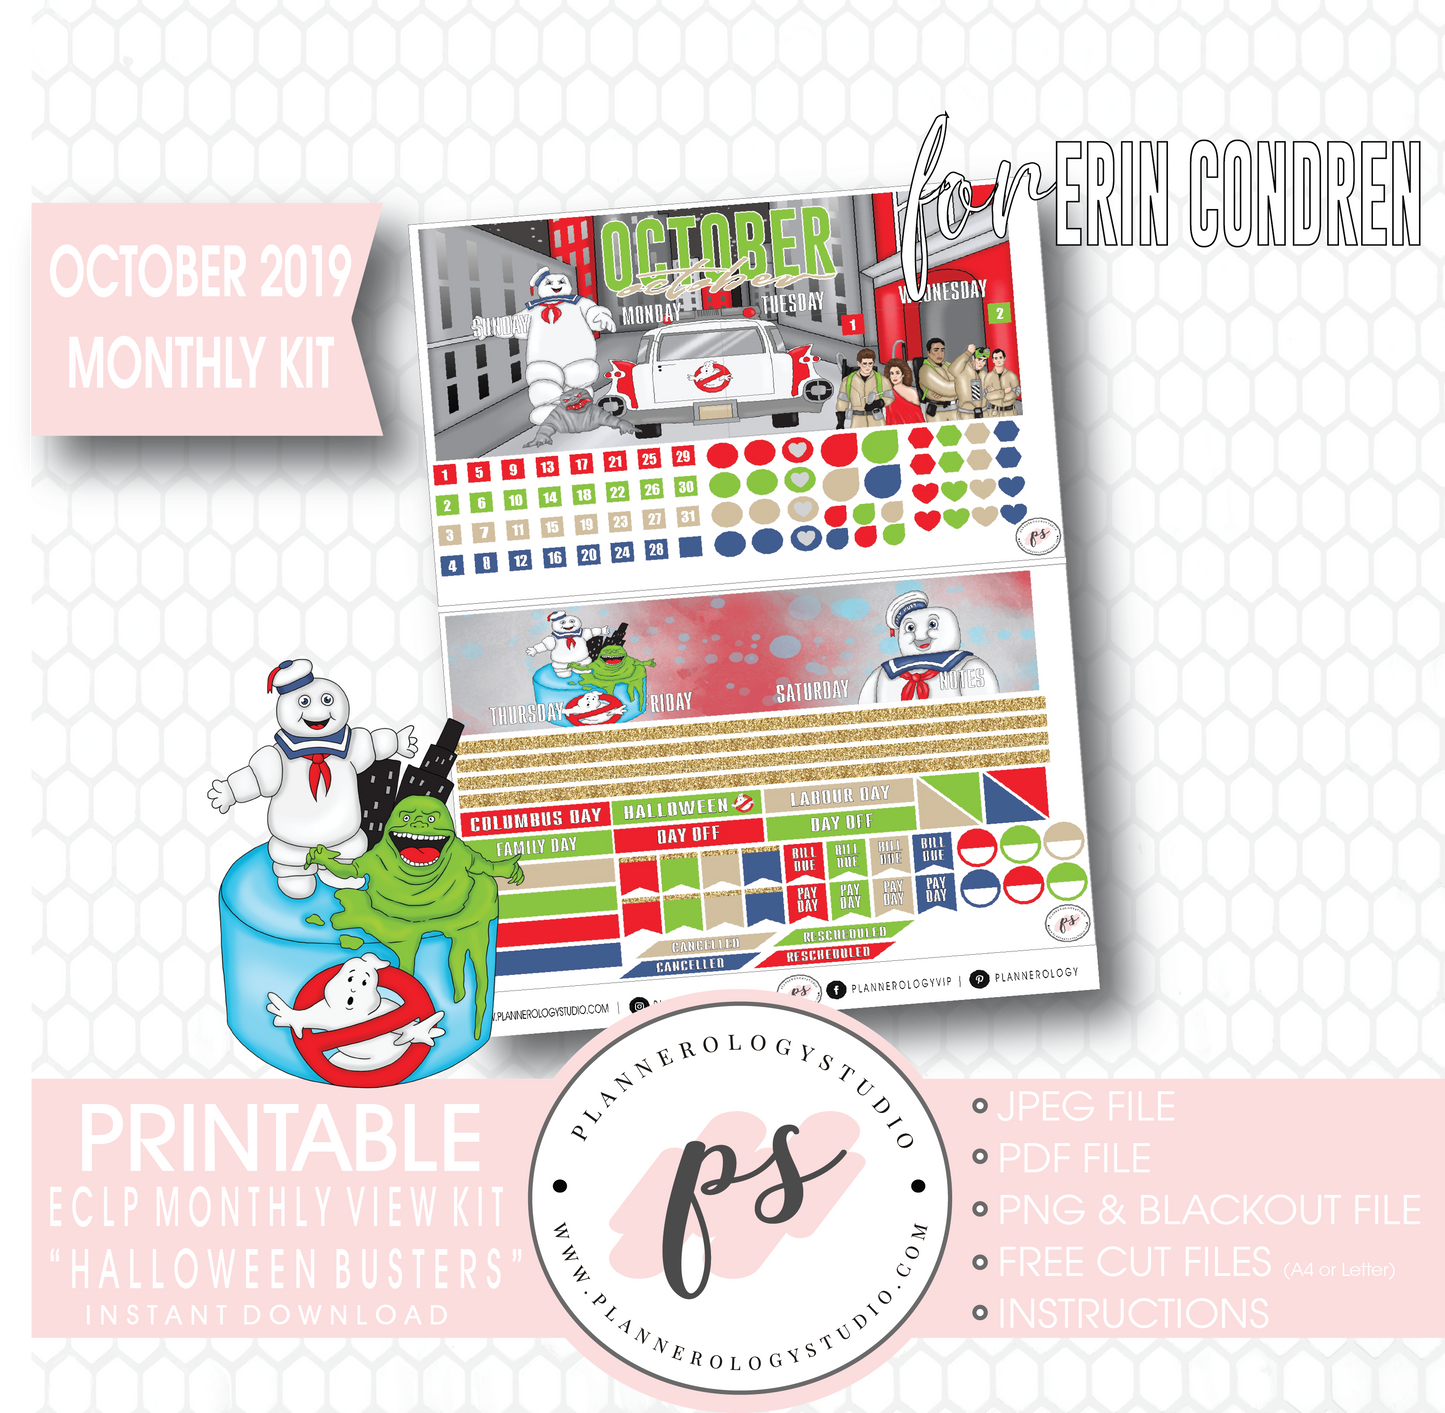 Halloween Busters October 2019 Monthly View Kit Printable Planner Stickers (for use with Erin Condren) - Plannerologystudio